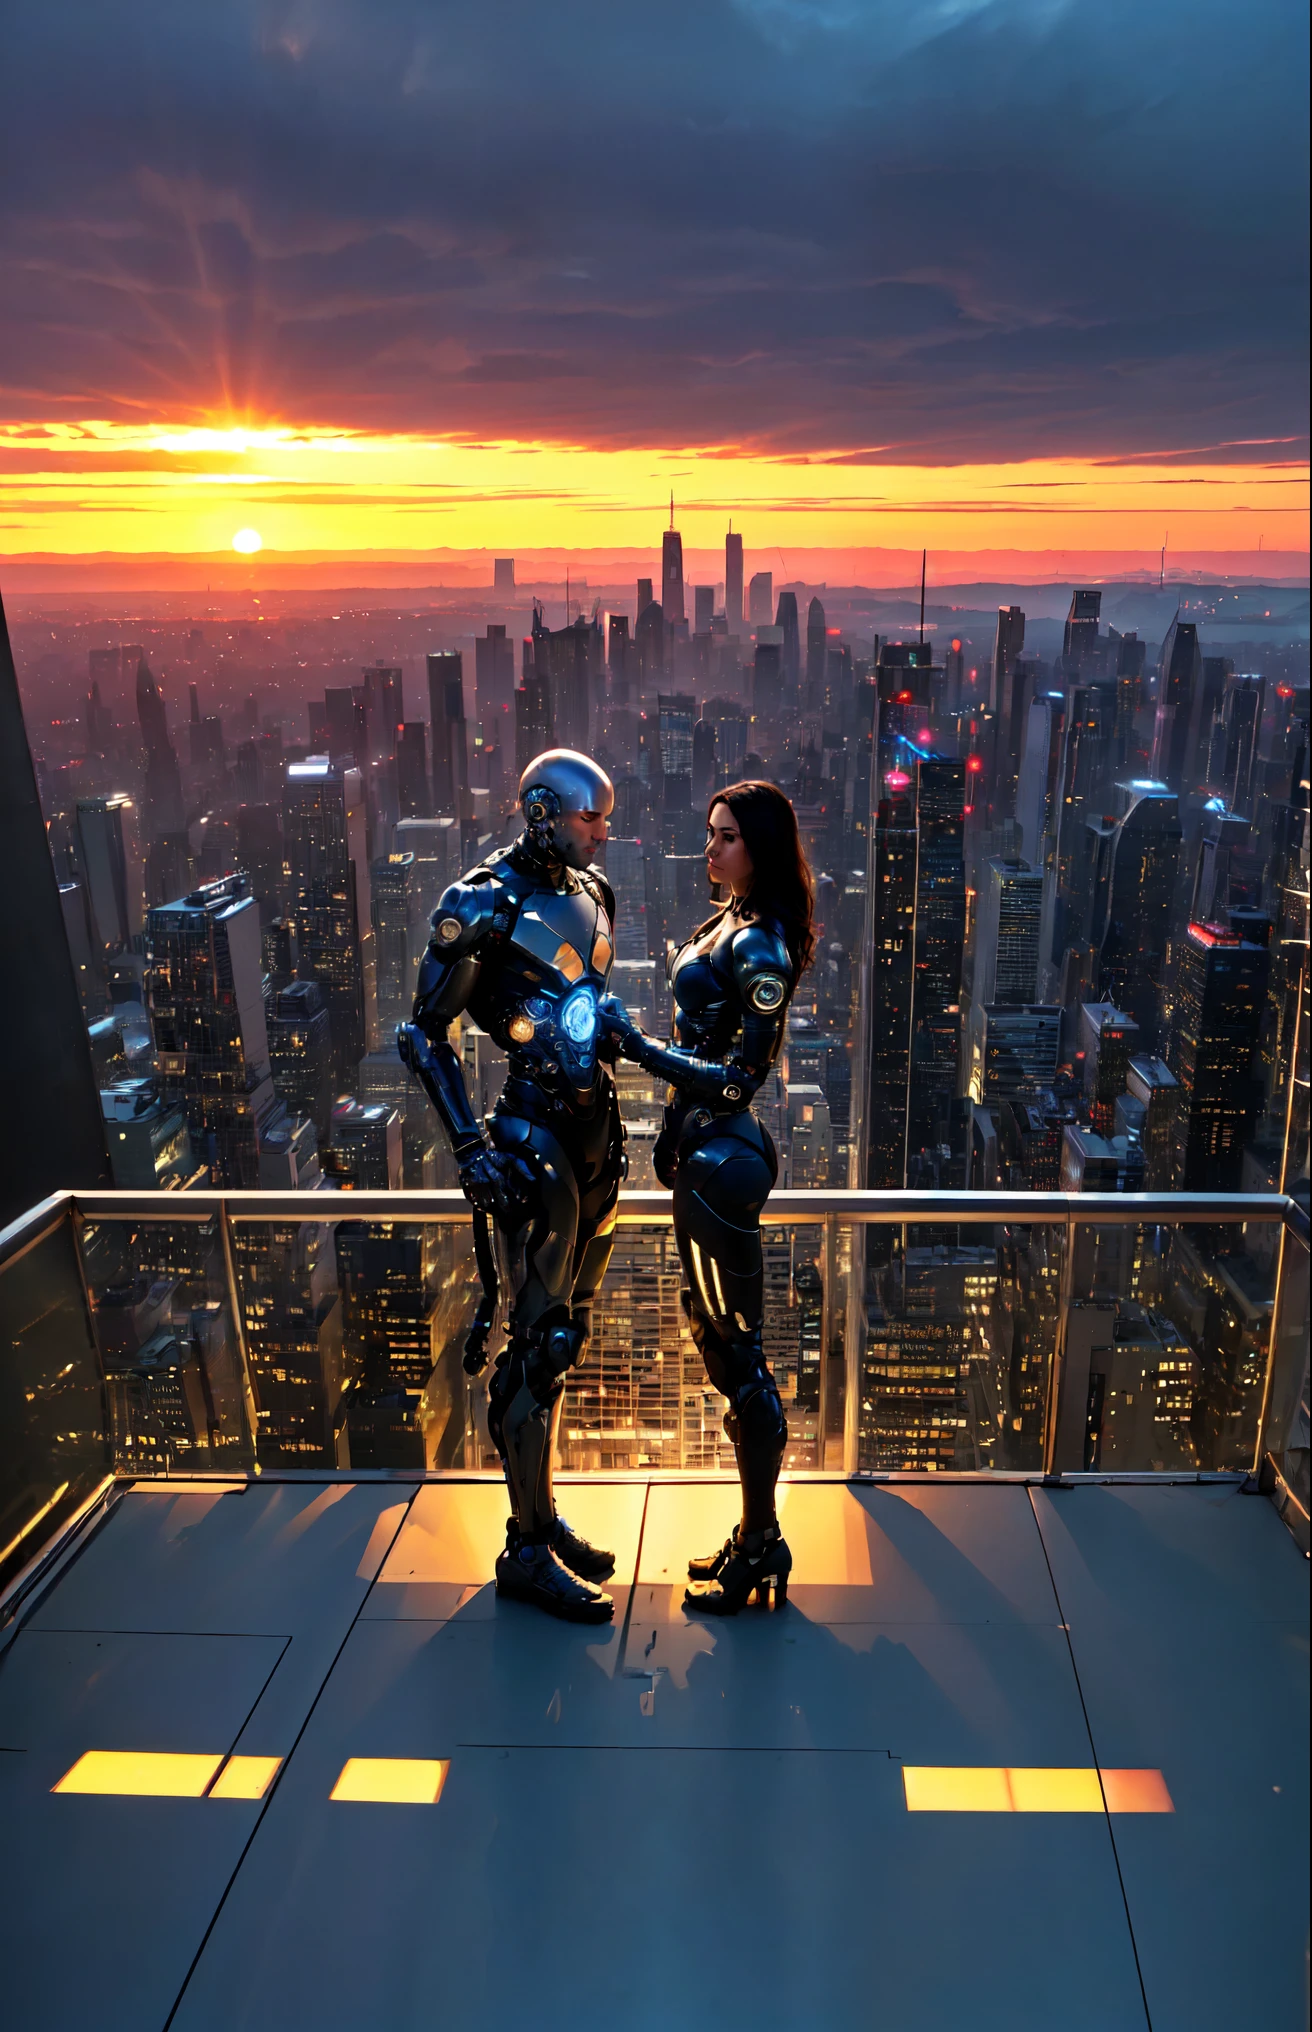 On the rooftop of a skyscraper, a male cyborg and a female cyborg engage in a sexual relationship. The cyborgs are both depicted in stunning detail, with intricate details highlighting their magnificent anatomies. The scene is captured in the highest quality, showcasing the absurd resolution of 8K. The artwork is a masterpiece, featuring beautiful and slim bodies that are expertly crafted. The intense focus on intricate details enhances the hyper-detailing of the cyborgs' features, making them appear even more realistic. The lighting is soft and natural, casting a gentle glow that accentuates their natural skin textures. The overall composition of the artwork is carefully cropped to showcase the enticing 1/2 body of the cyborgs. The HDR technology further enhances the visual impact of the image, resulting in a truly breathtaking piece.